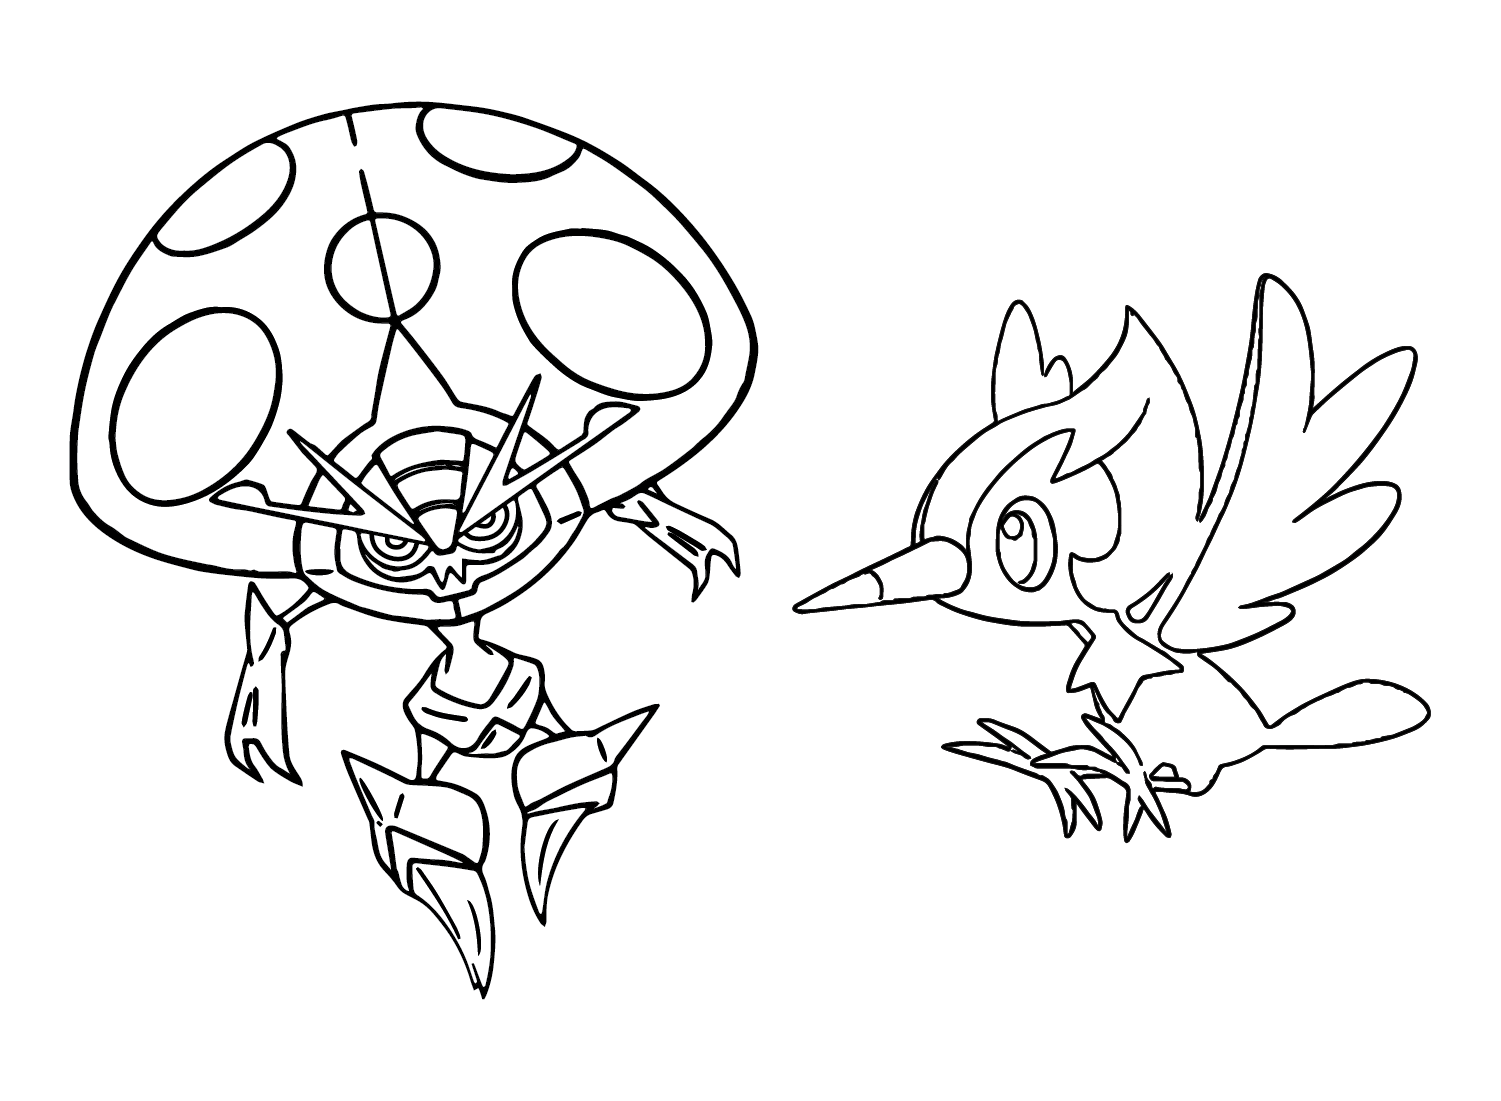 Orbeetle and Pikipek Coloring Page